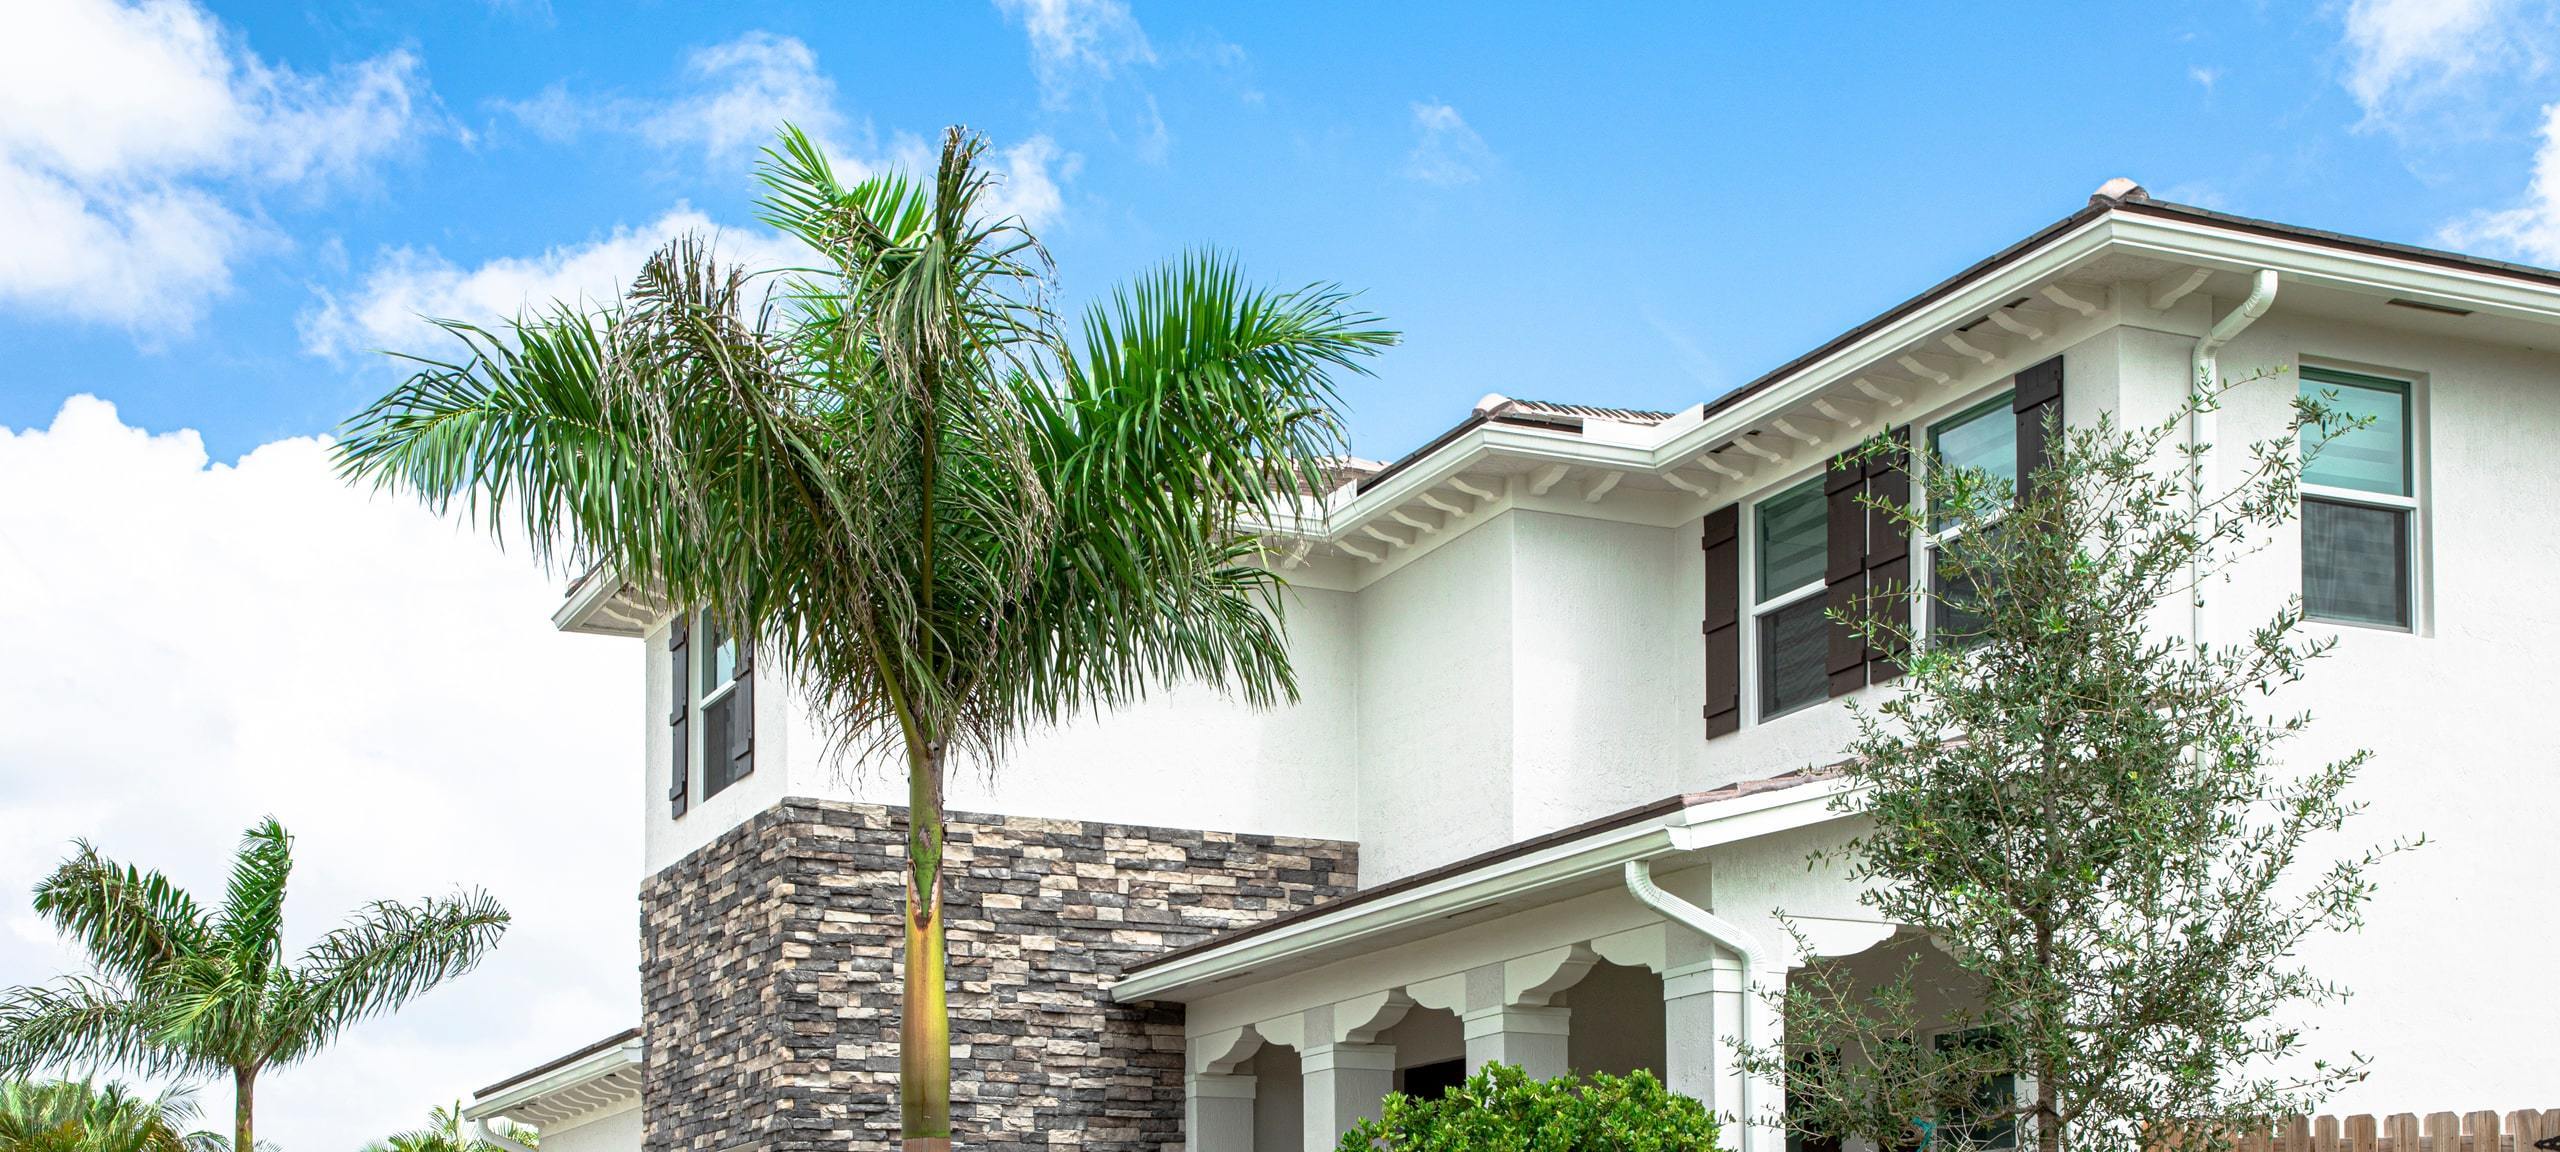 A single family home with stone exteriors in Reunion, Florida.